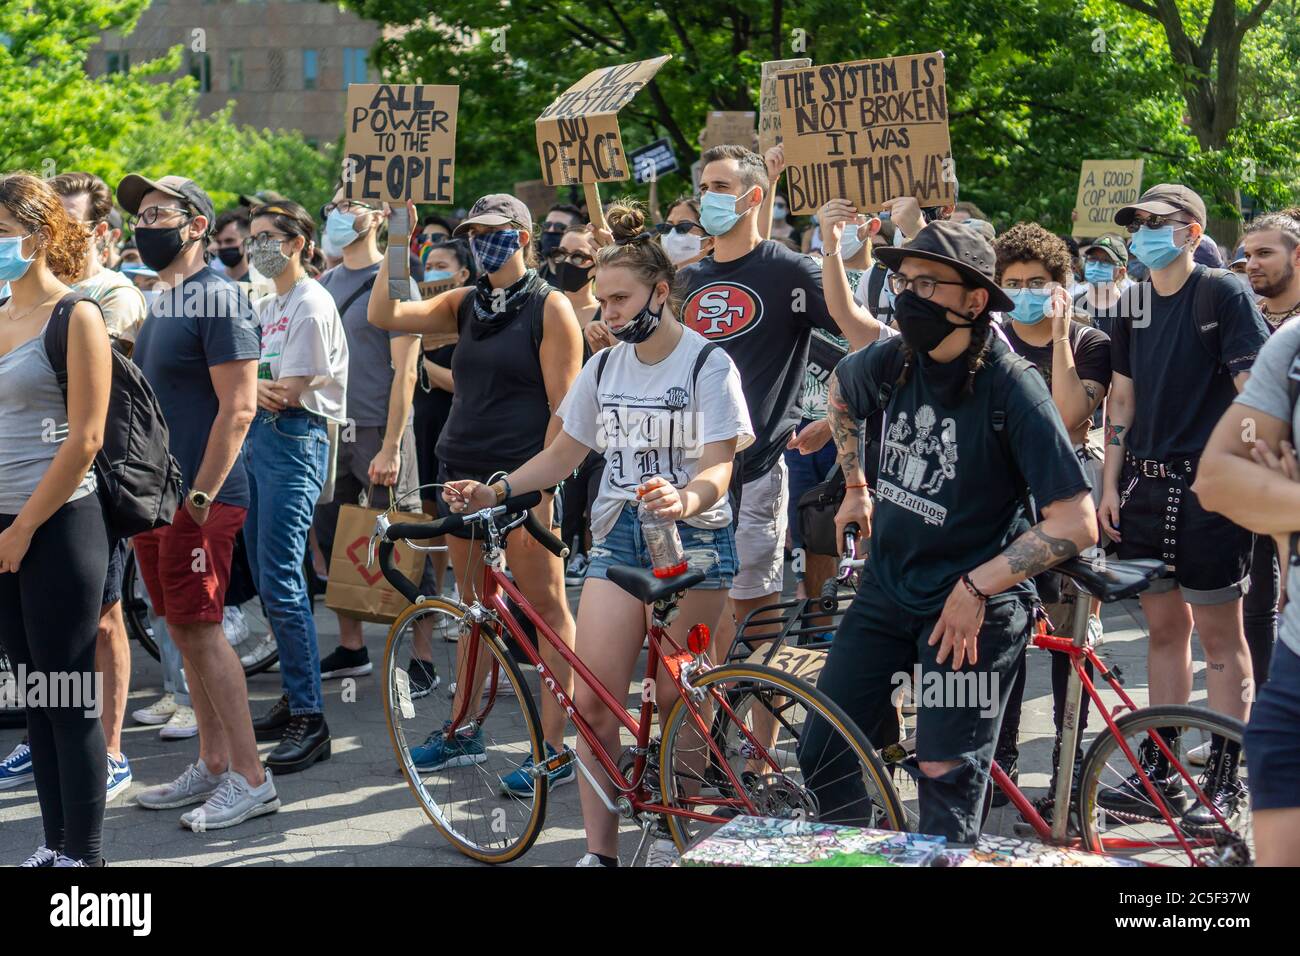 Black Lives Matter demonstrators rally in Washington Square Park in New York protesting the death of George Floyd, seen on on Juneteenth, Friday, June 19, 2020. (© Richard B. Levine) Stock Photo